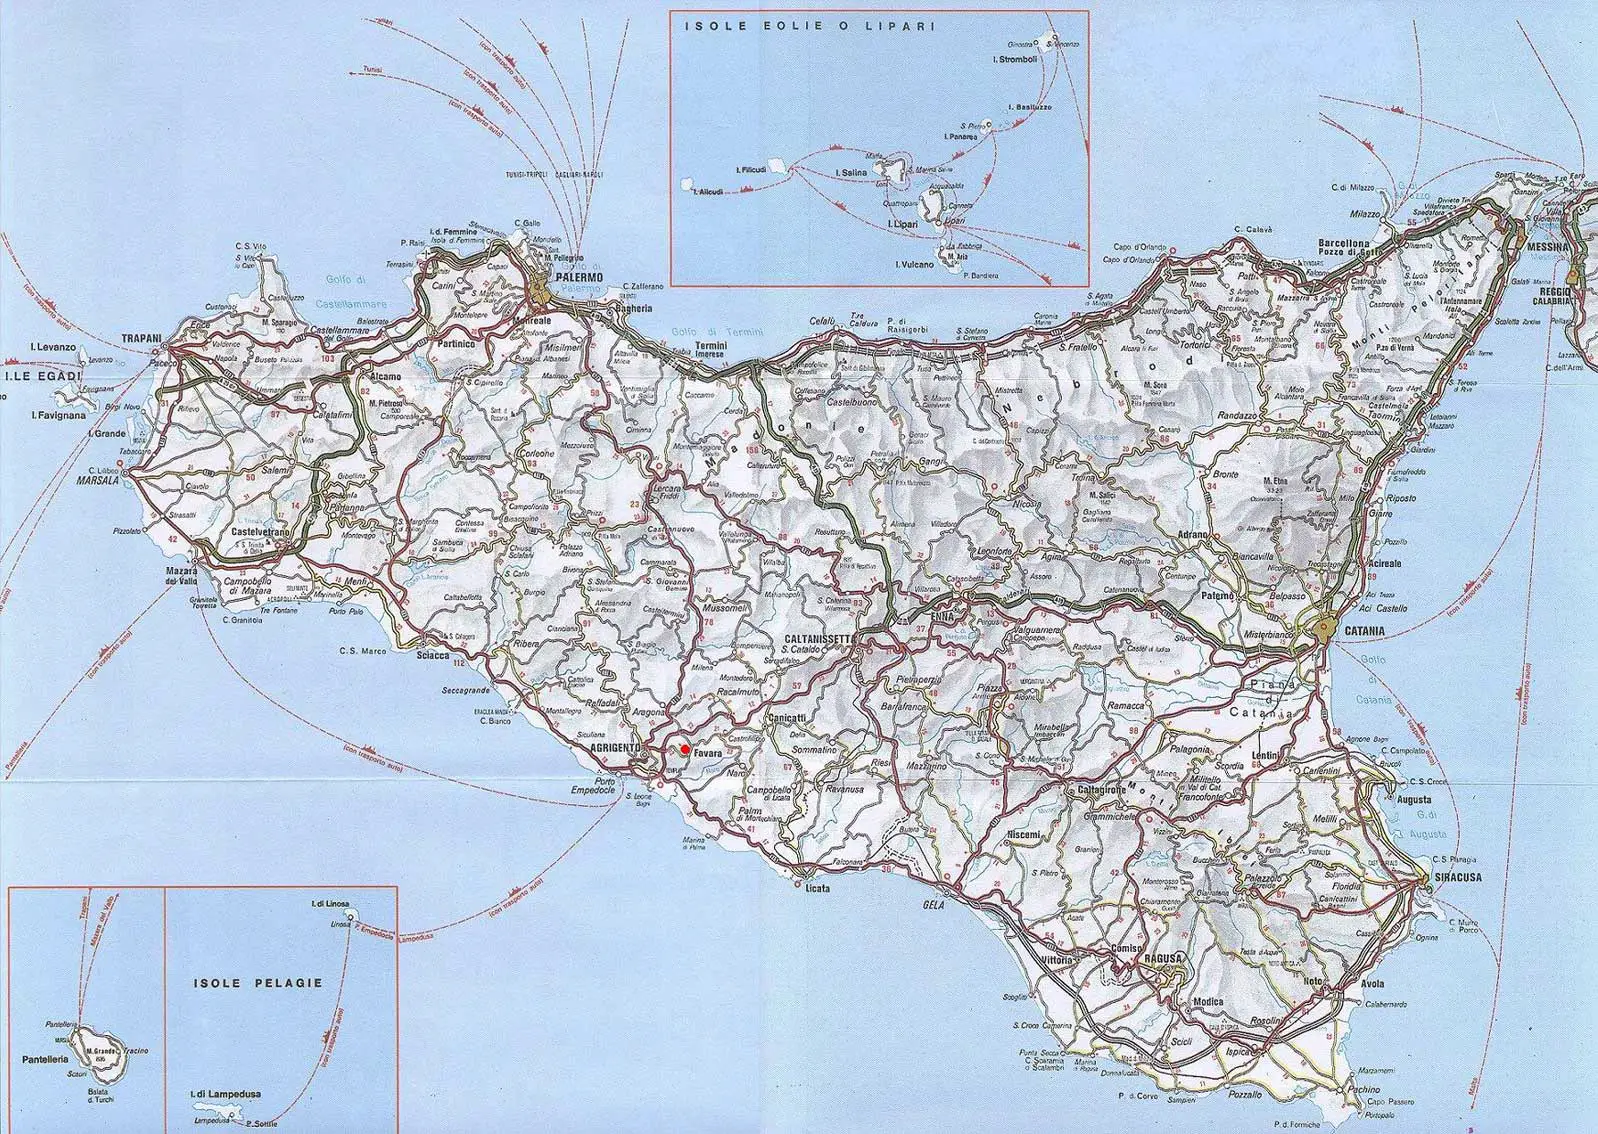 Printable Map Of Sicily